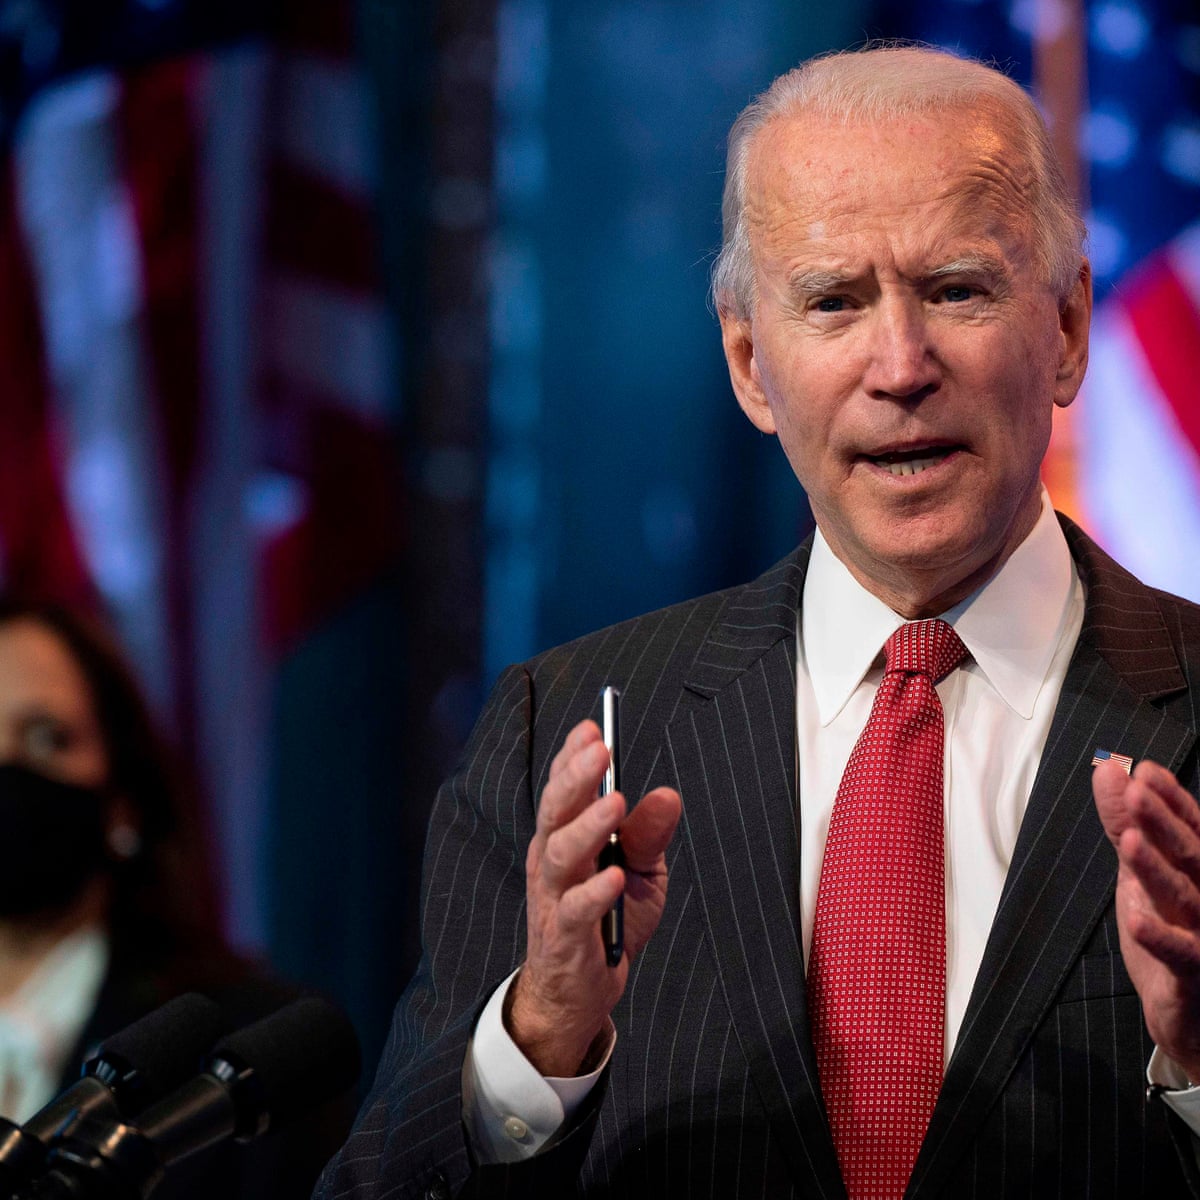 when did joe biden have brain surgery - Biden|President|Joe|Years|Trump|Delaware|Vice|Time|Obama|Senate|States|Law|Age|Campaign|Election|Administration|Family|House|Senator|Office|School|Wife|People|Hunter|University|Act|State|Year|Life|Party|Committee|Children|Beau|Daughter|War|Jill|Day|Facts|Americans|Presidency|Joe Biden|United States|Vice President|White House|Law School|President Trump|Foreign Relations Committee|Donald Trump|President Biden|Presidential Campaign|Presidential Election|Democratic Party|Syracuse University|United Nations|Net Worth|Barack Obama|Judiciary Committee|Neilia Hunter|U.S. Senate|Hillary Clinton|New York Times|Obama Administration|Empty Store Shelves|Systemic Racism|Castle County Council|Archmere Academy|U.S. Senator|Vice Presidency|Second Term|Biden Administration